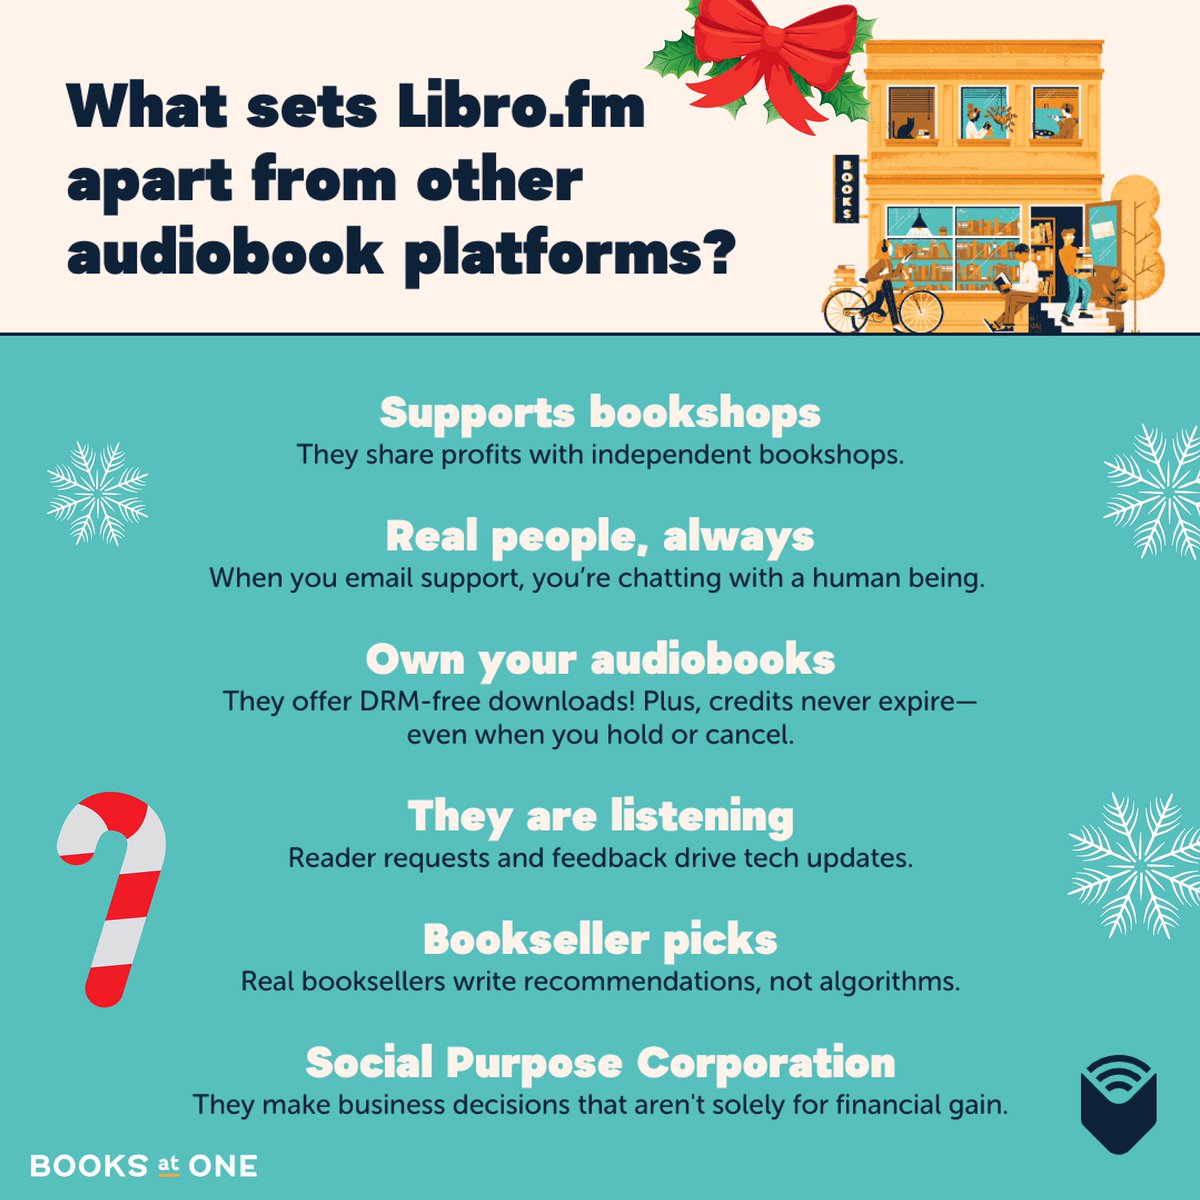 Why should you buy from Libro.fm instead of other audiobook platforms? Easy! Libro supports independent bookshops, readers have a real say, and they are a social purpose corporation ⭐️🙌 Support Books at One with your Libro.fm purchases🎄📚